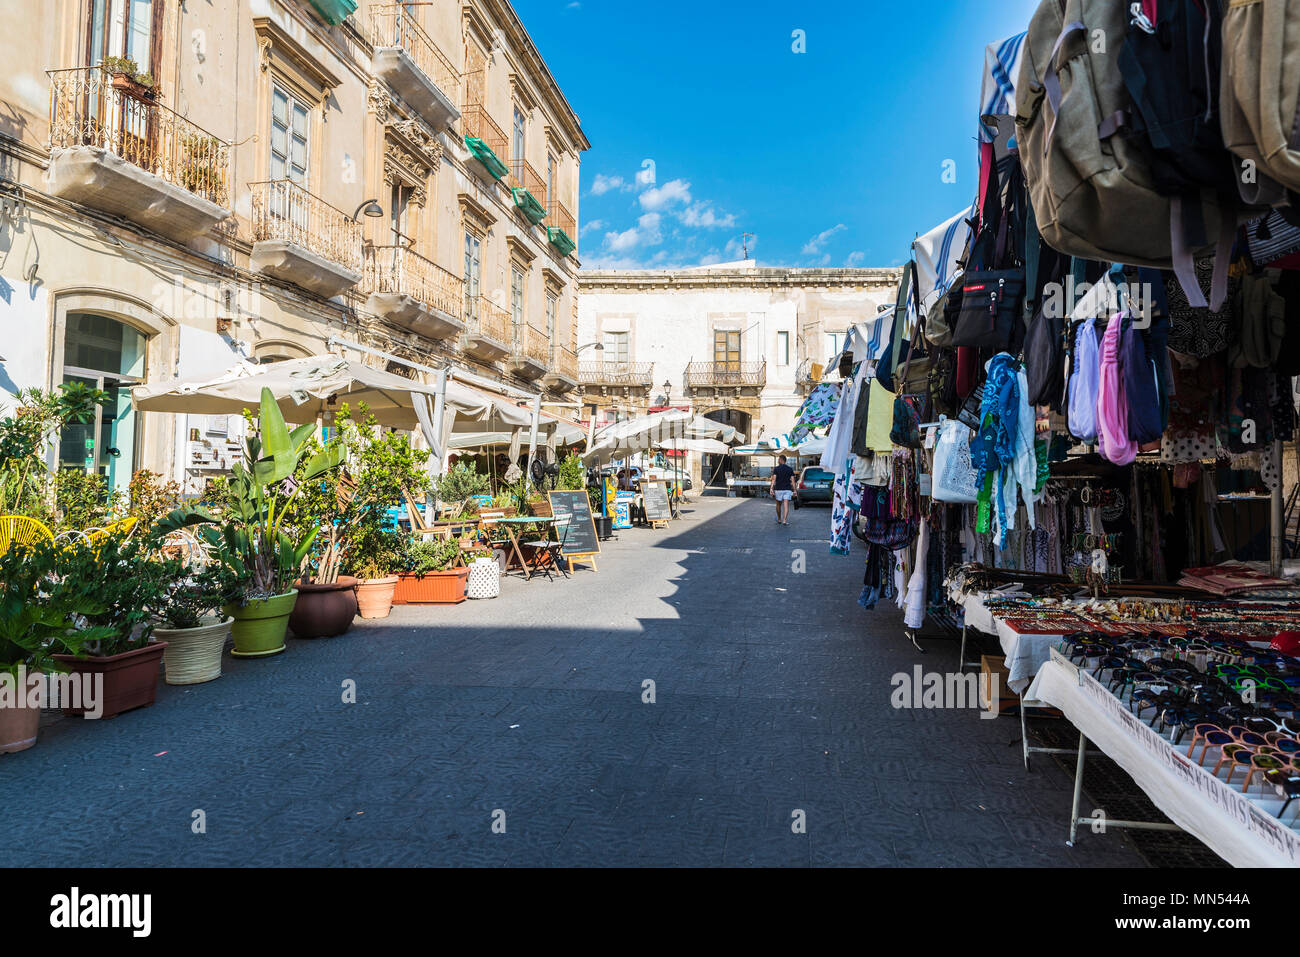 Siracusa, Italy - August 17, 2017: Souvenir shop in a flea market and a terraces of bar restaurant on a street in Siracusa, Sicily, Italy Stock Photo